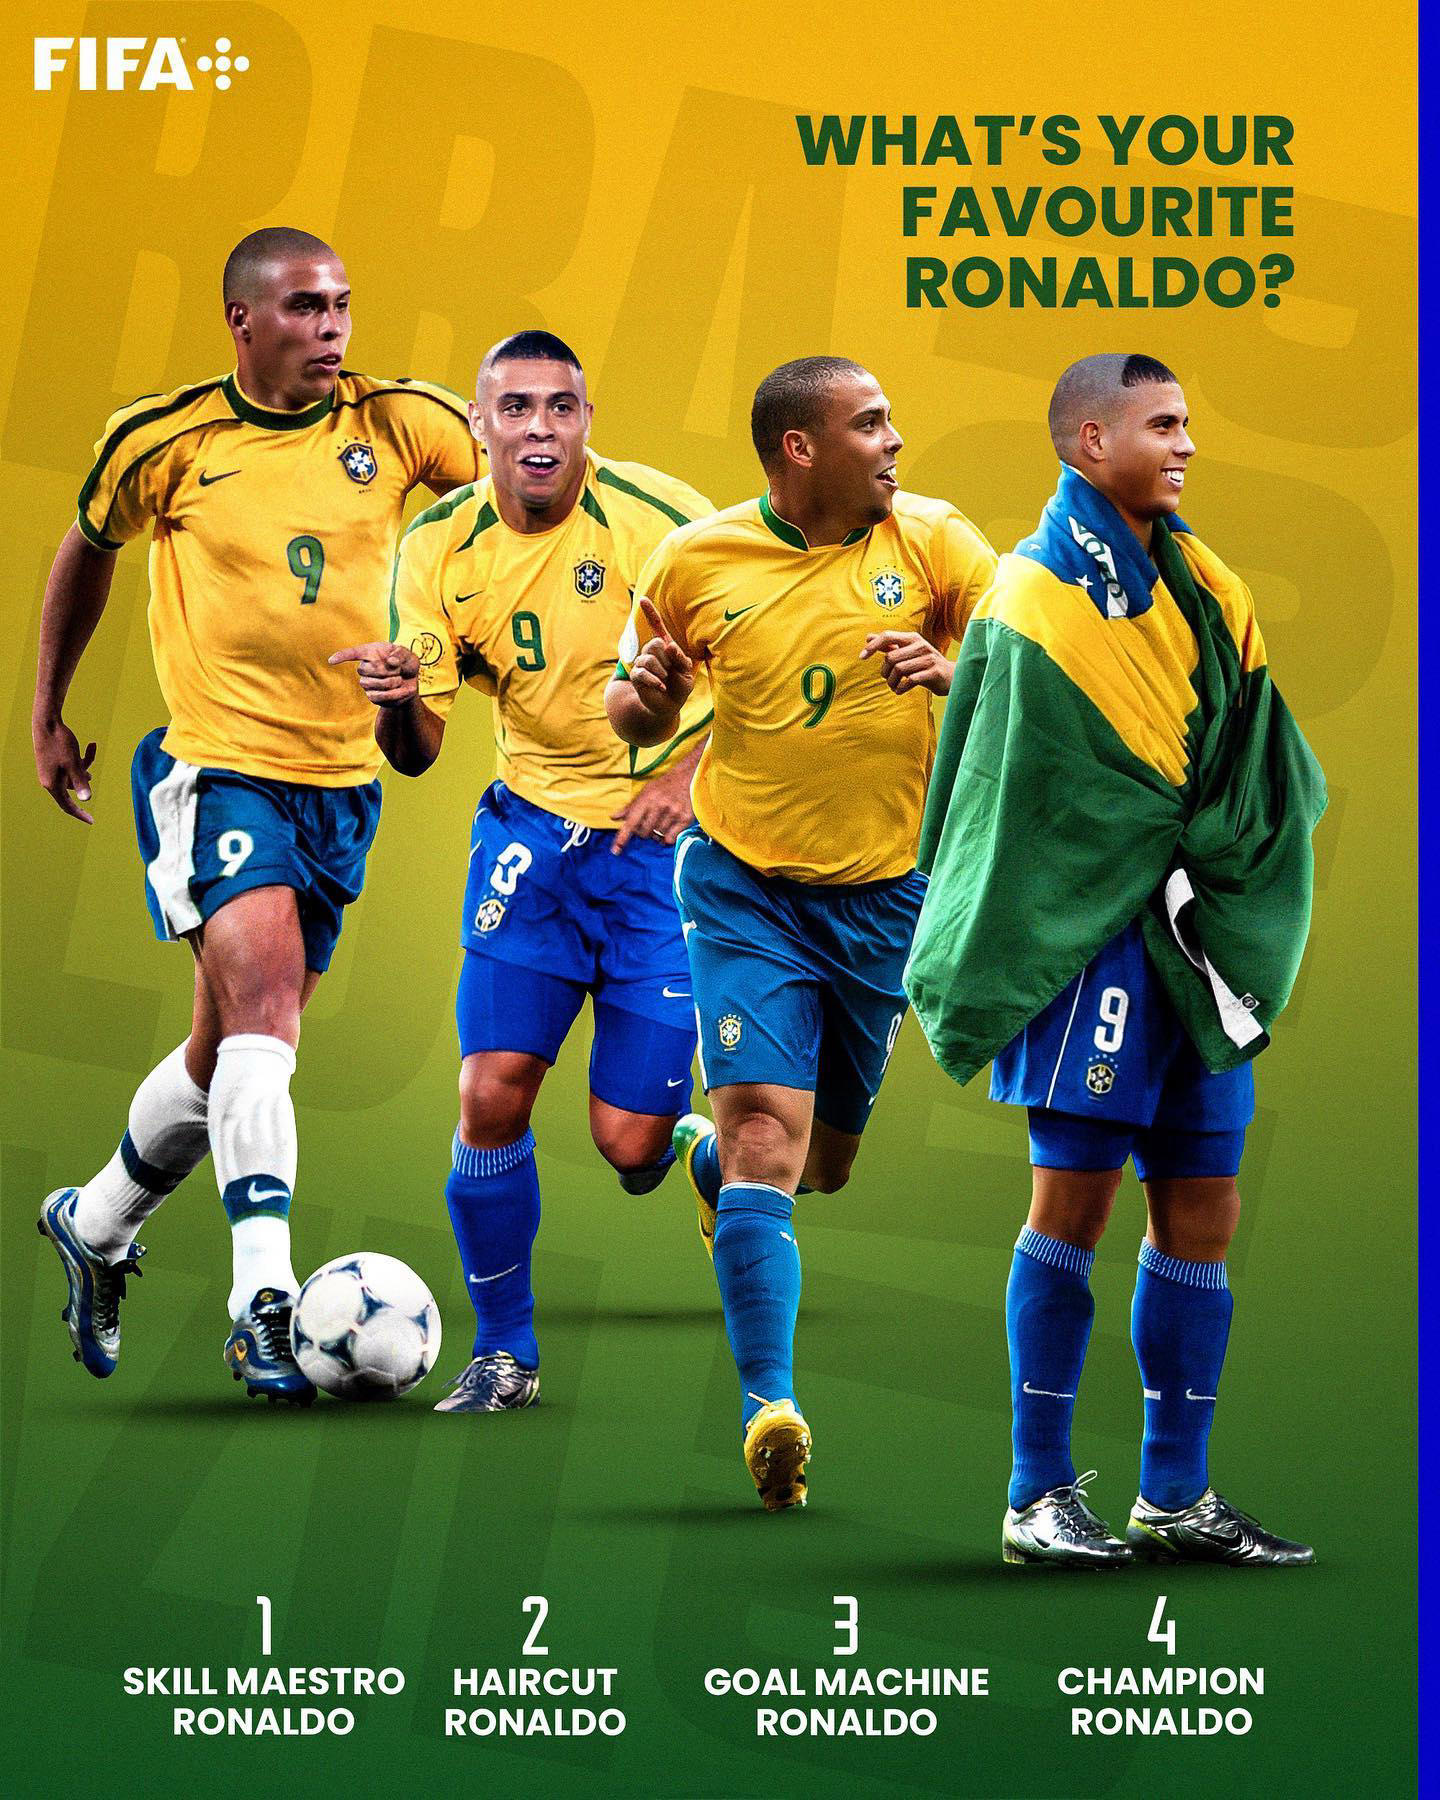 FIFA World Cup - Every version of O Fenomeno is… well, phenomenal